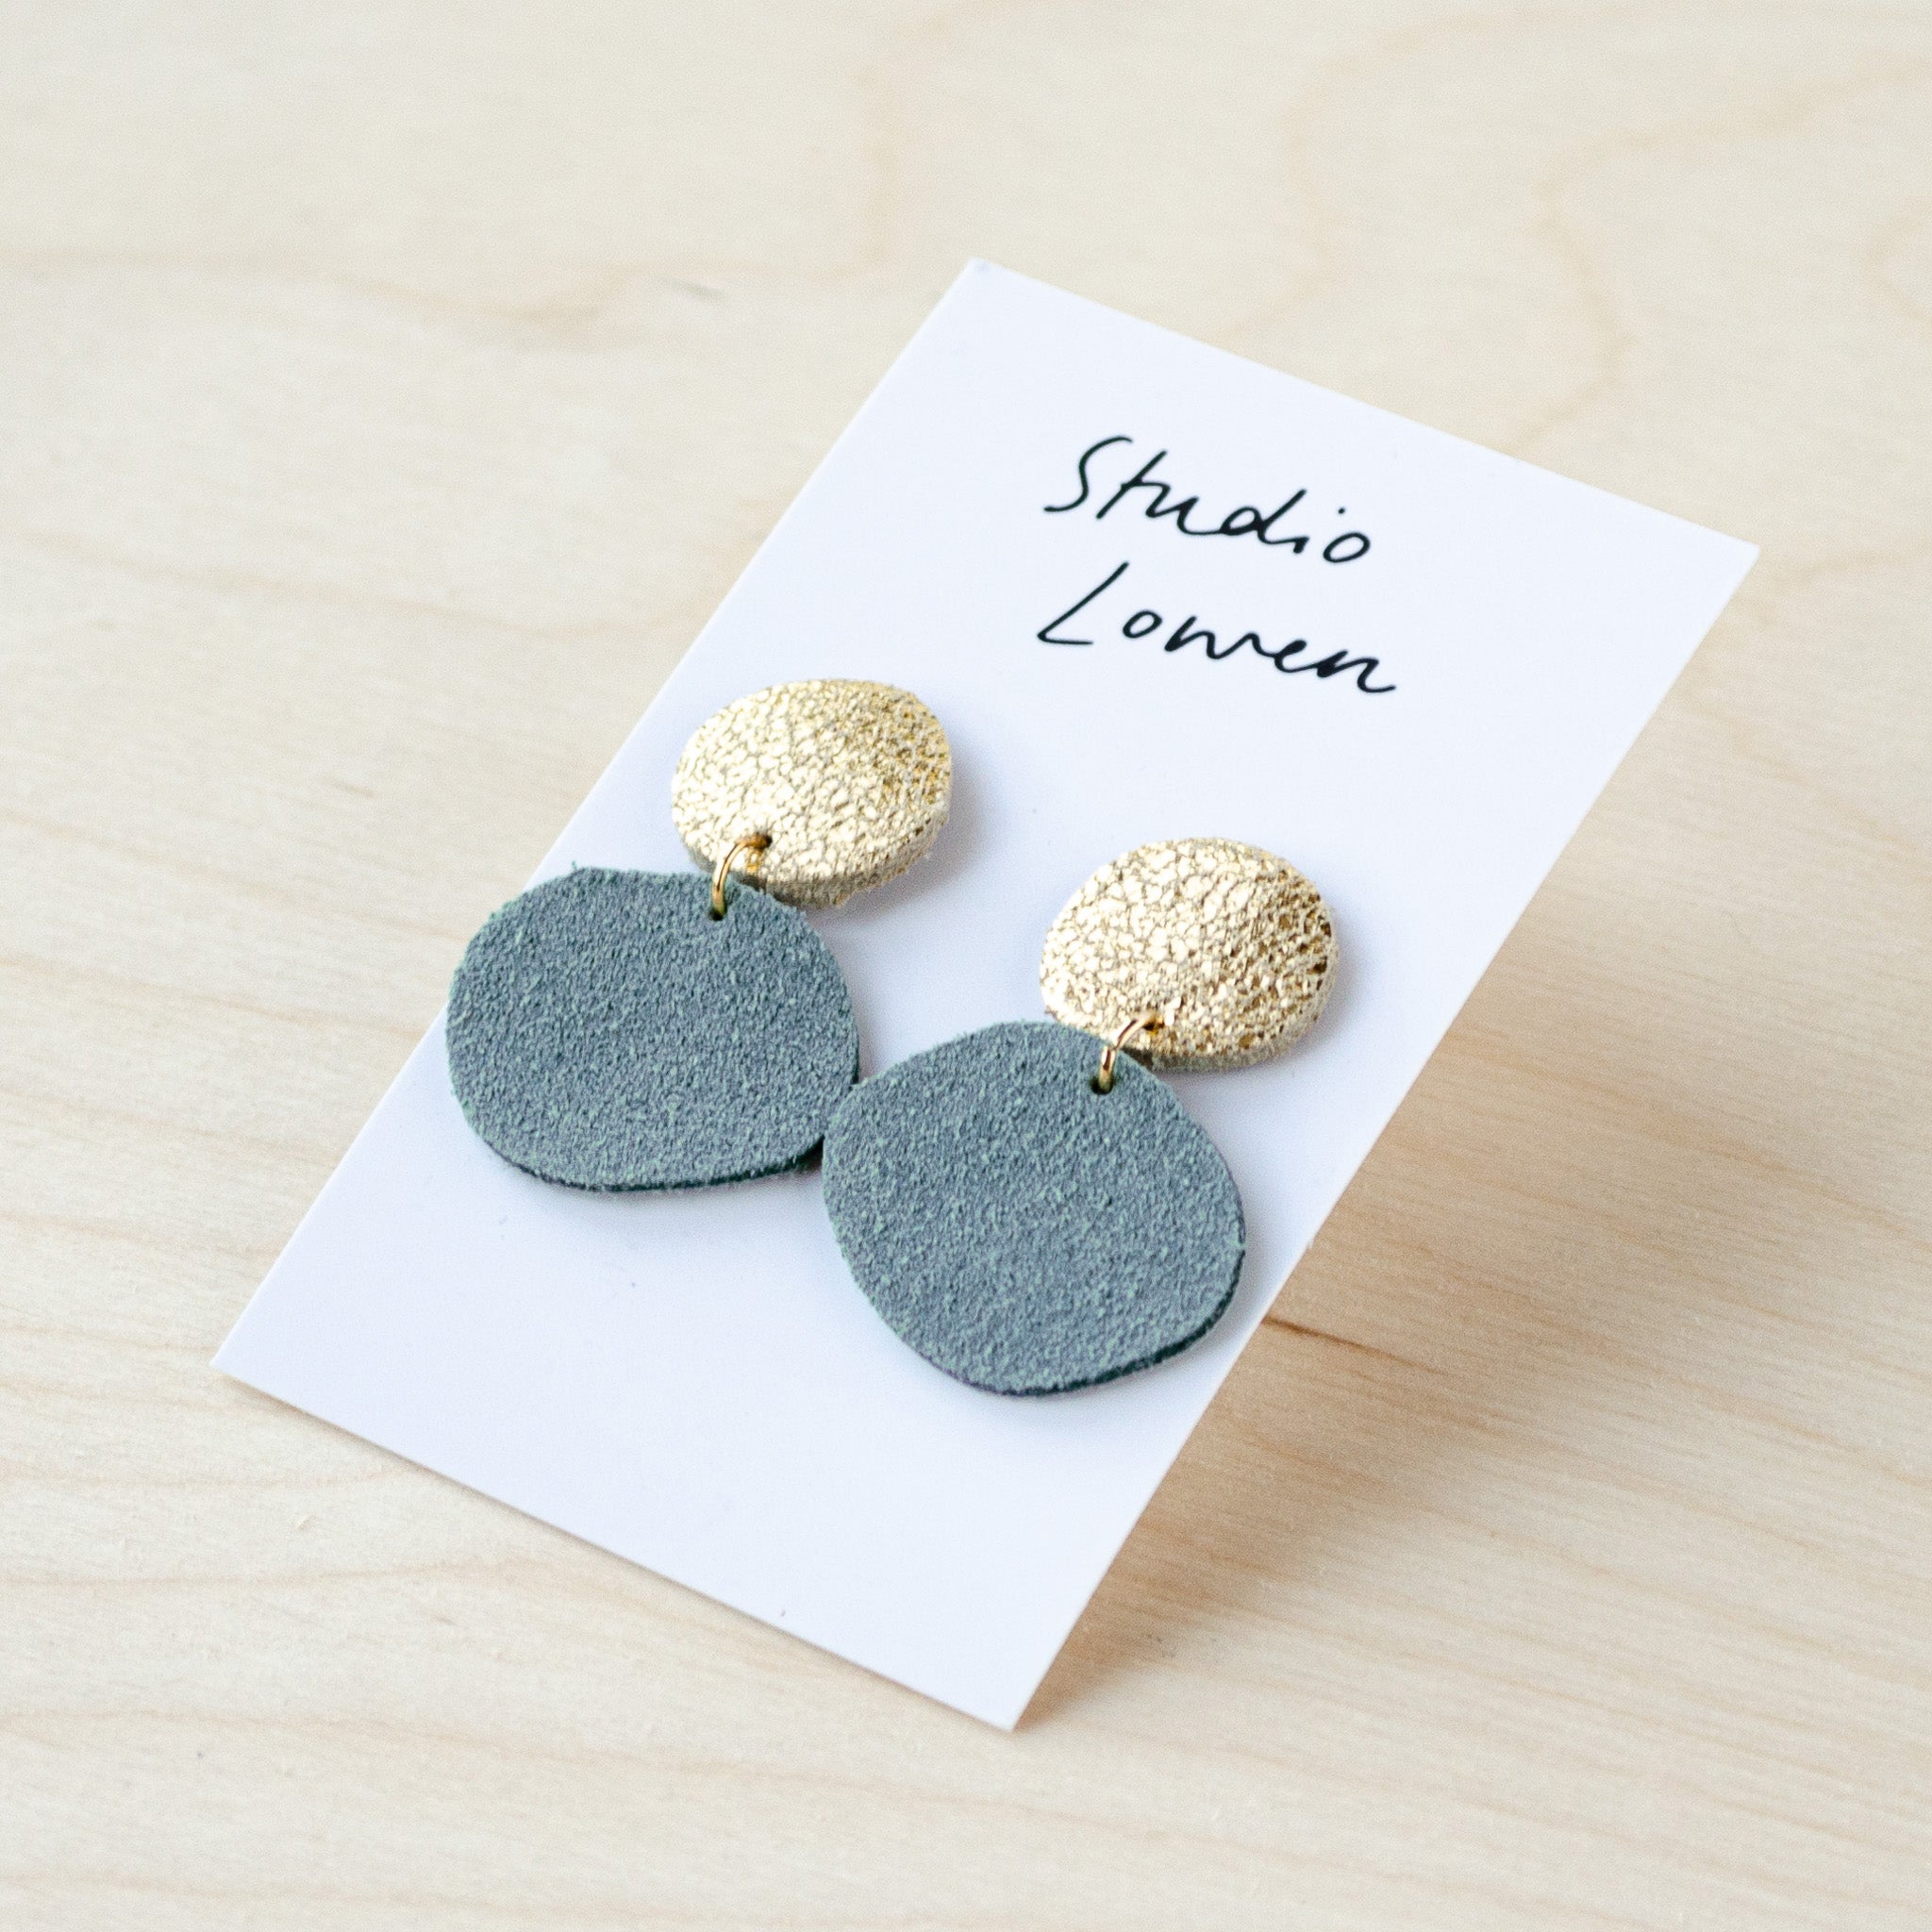 Bili Pop leather and suede earrings featuring a small circle at the top in gold and a larger drop circle at the bottom in pale blue.